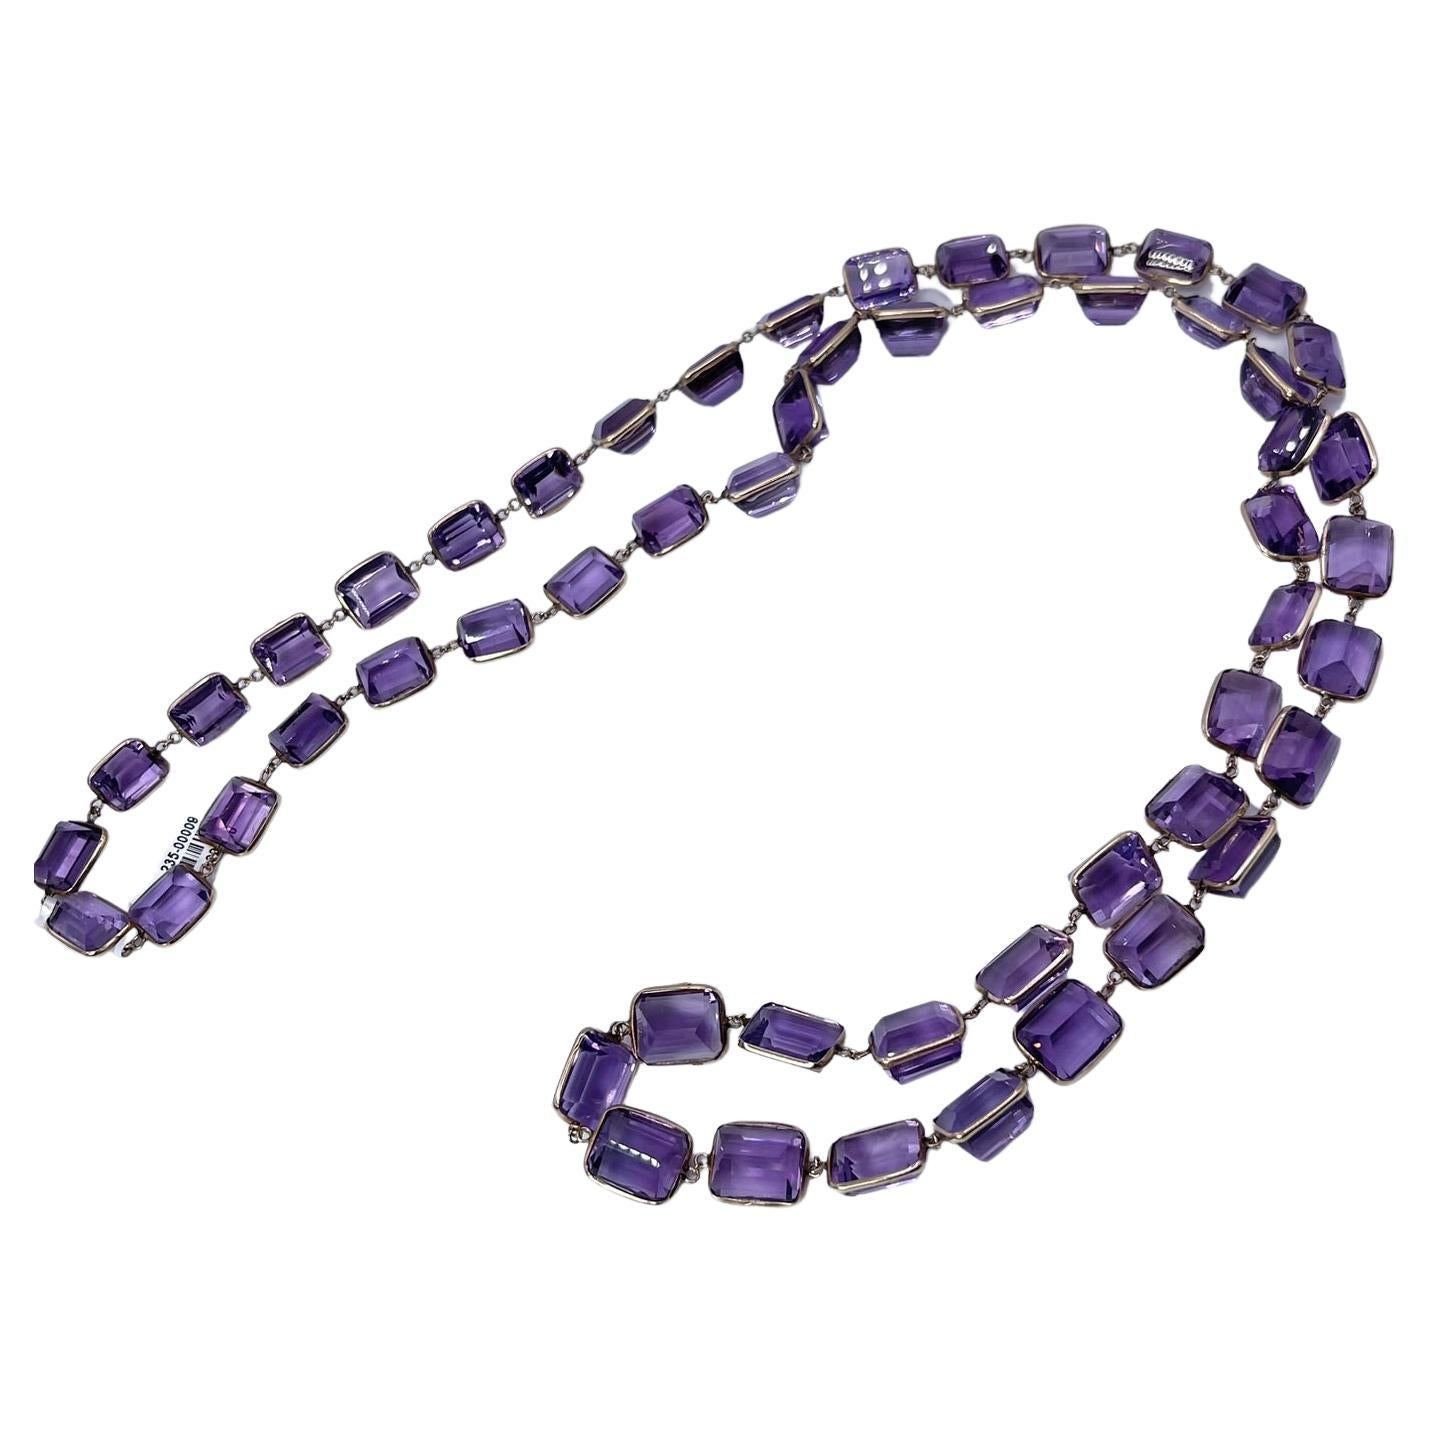 Amethyst Necklace Long Natural Amethyst Yard Necklace Link Necklace 300 Carats 